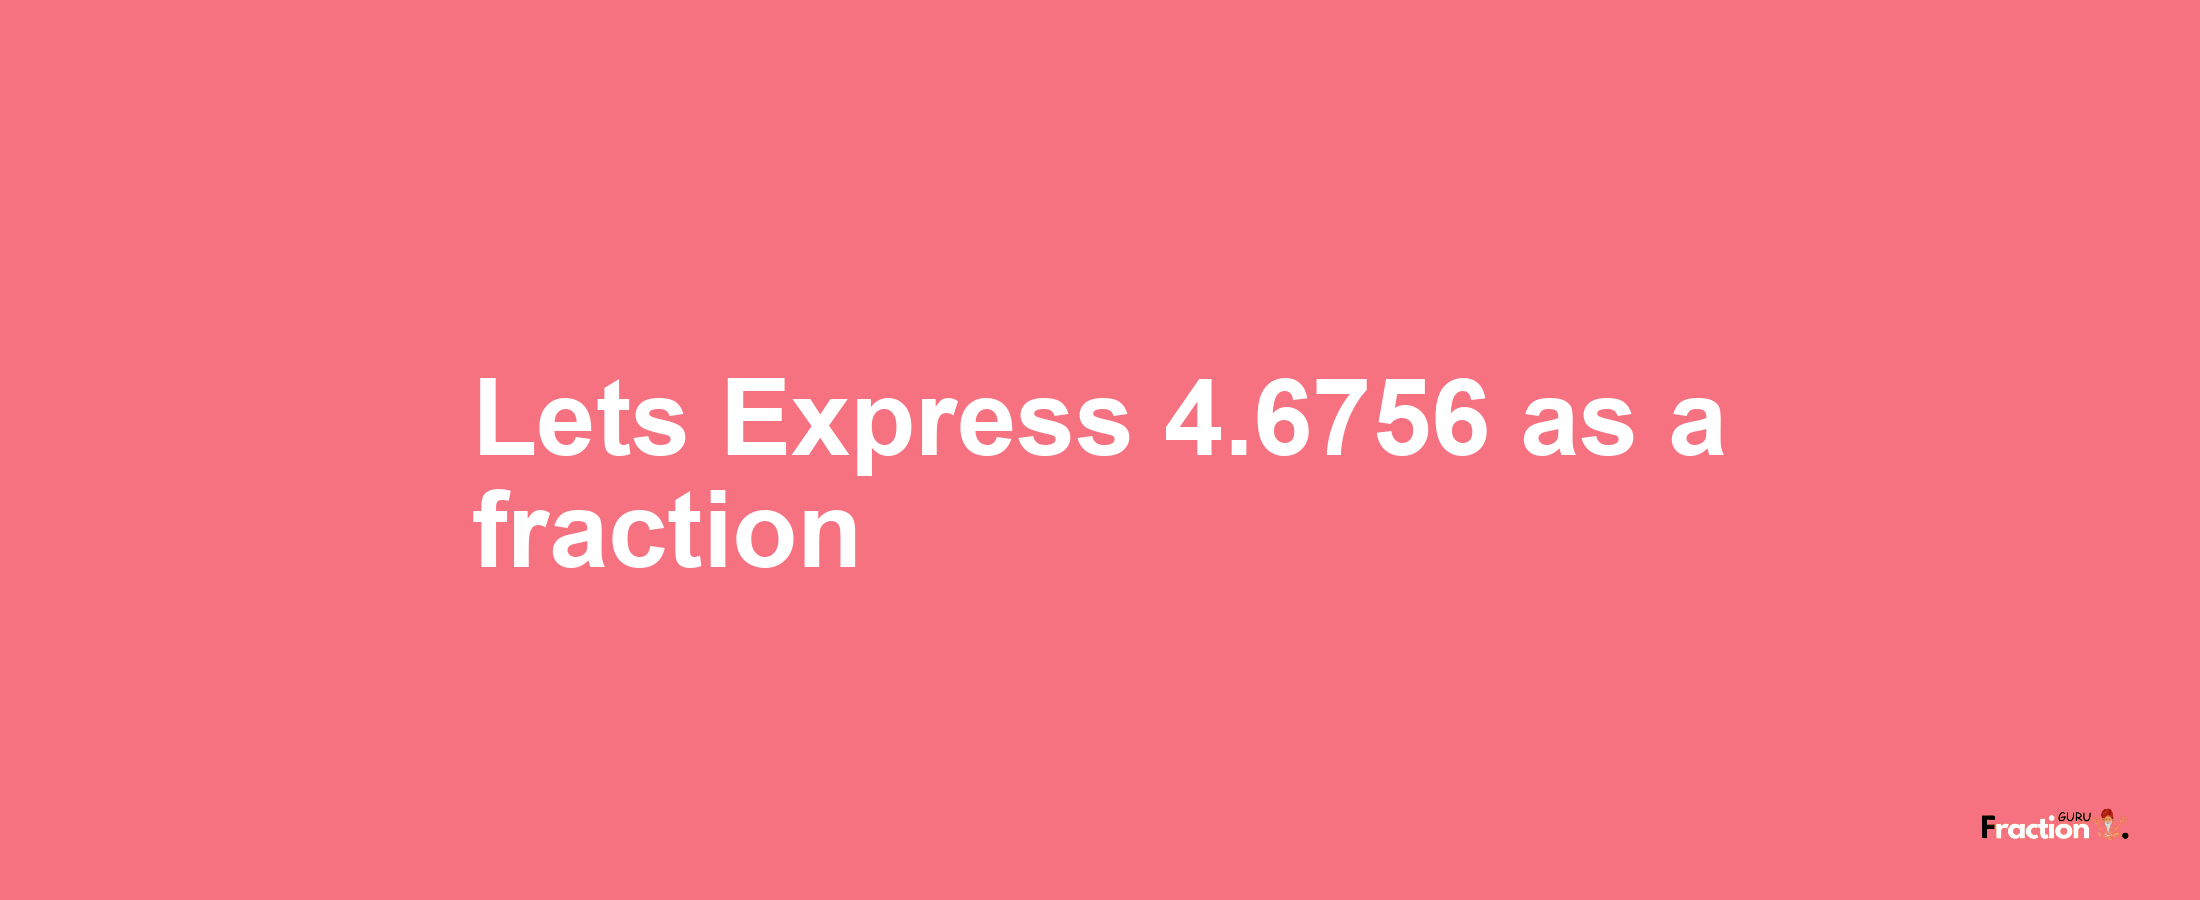 Lets Express 4.6756 as afraction